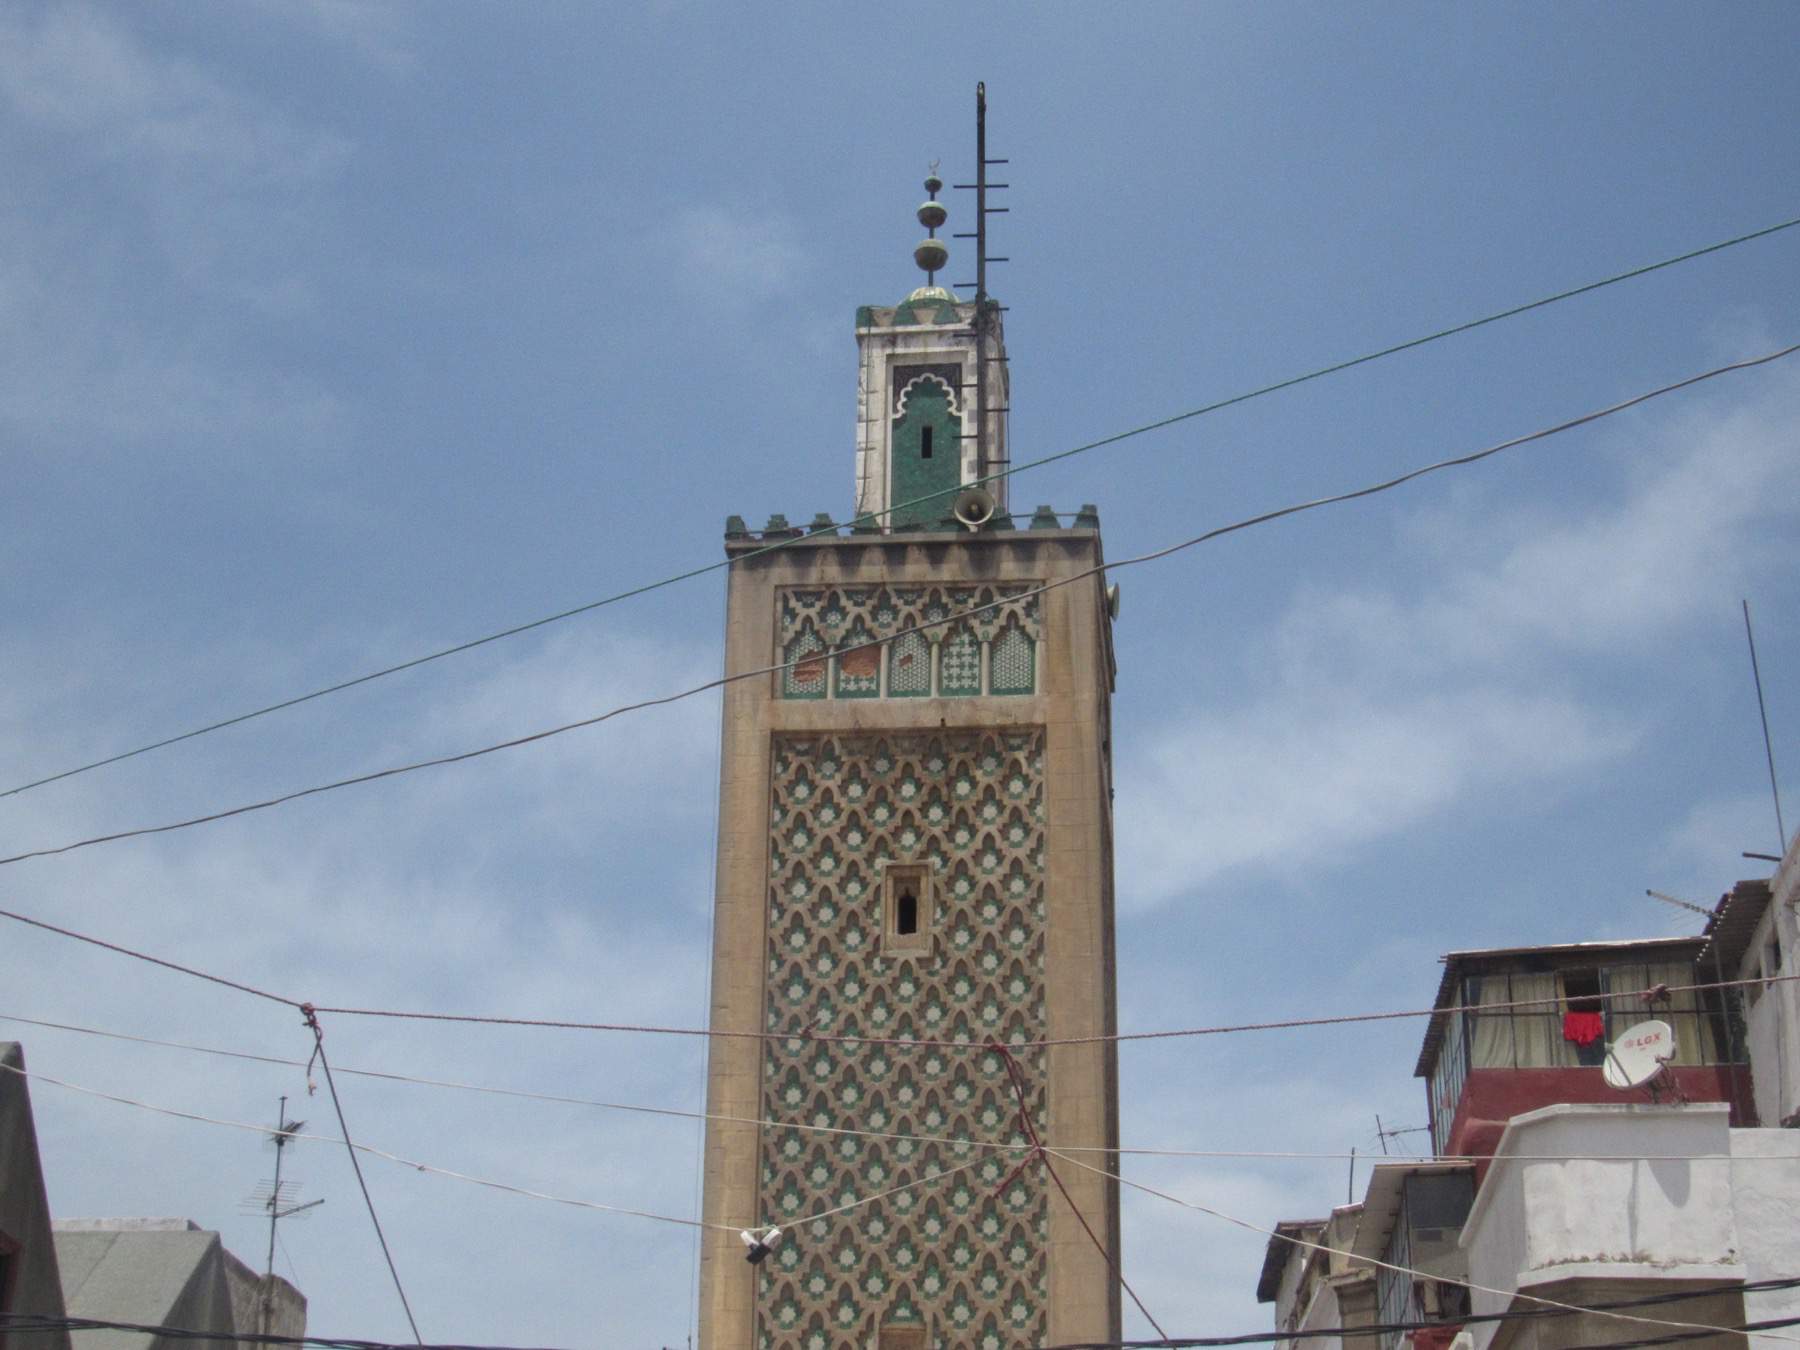 Exterior view of the top portion of the minaret